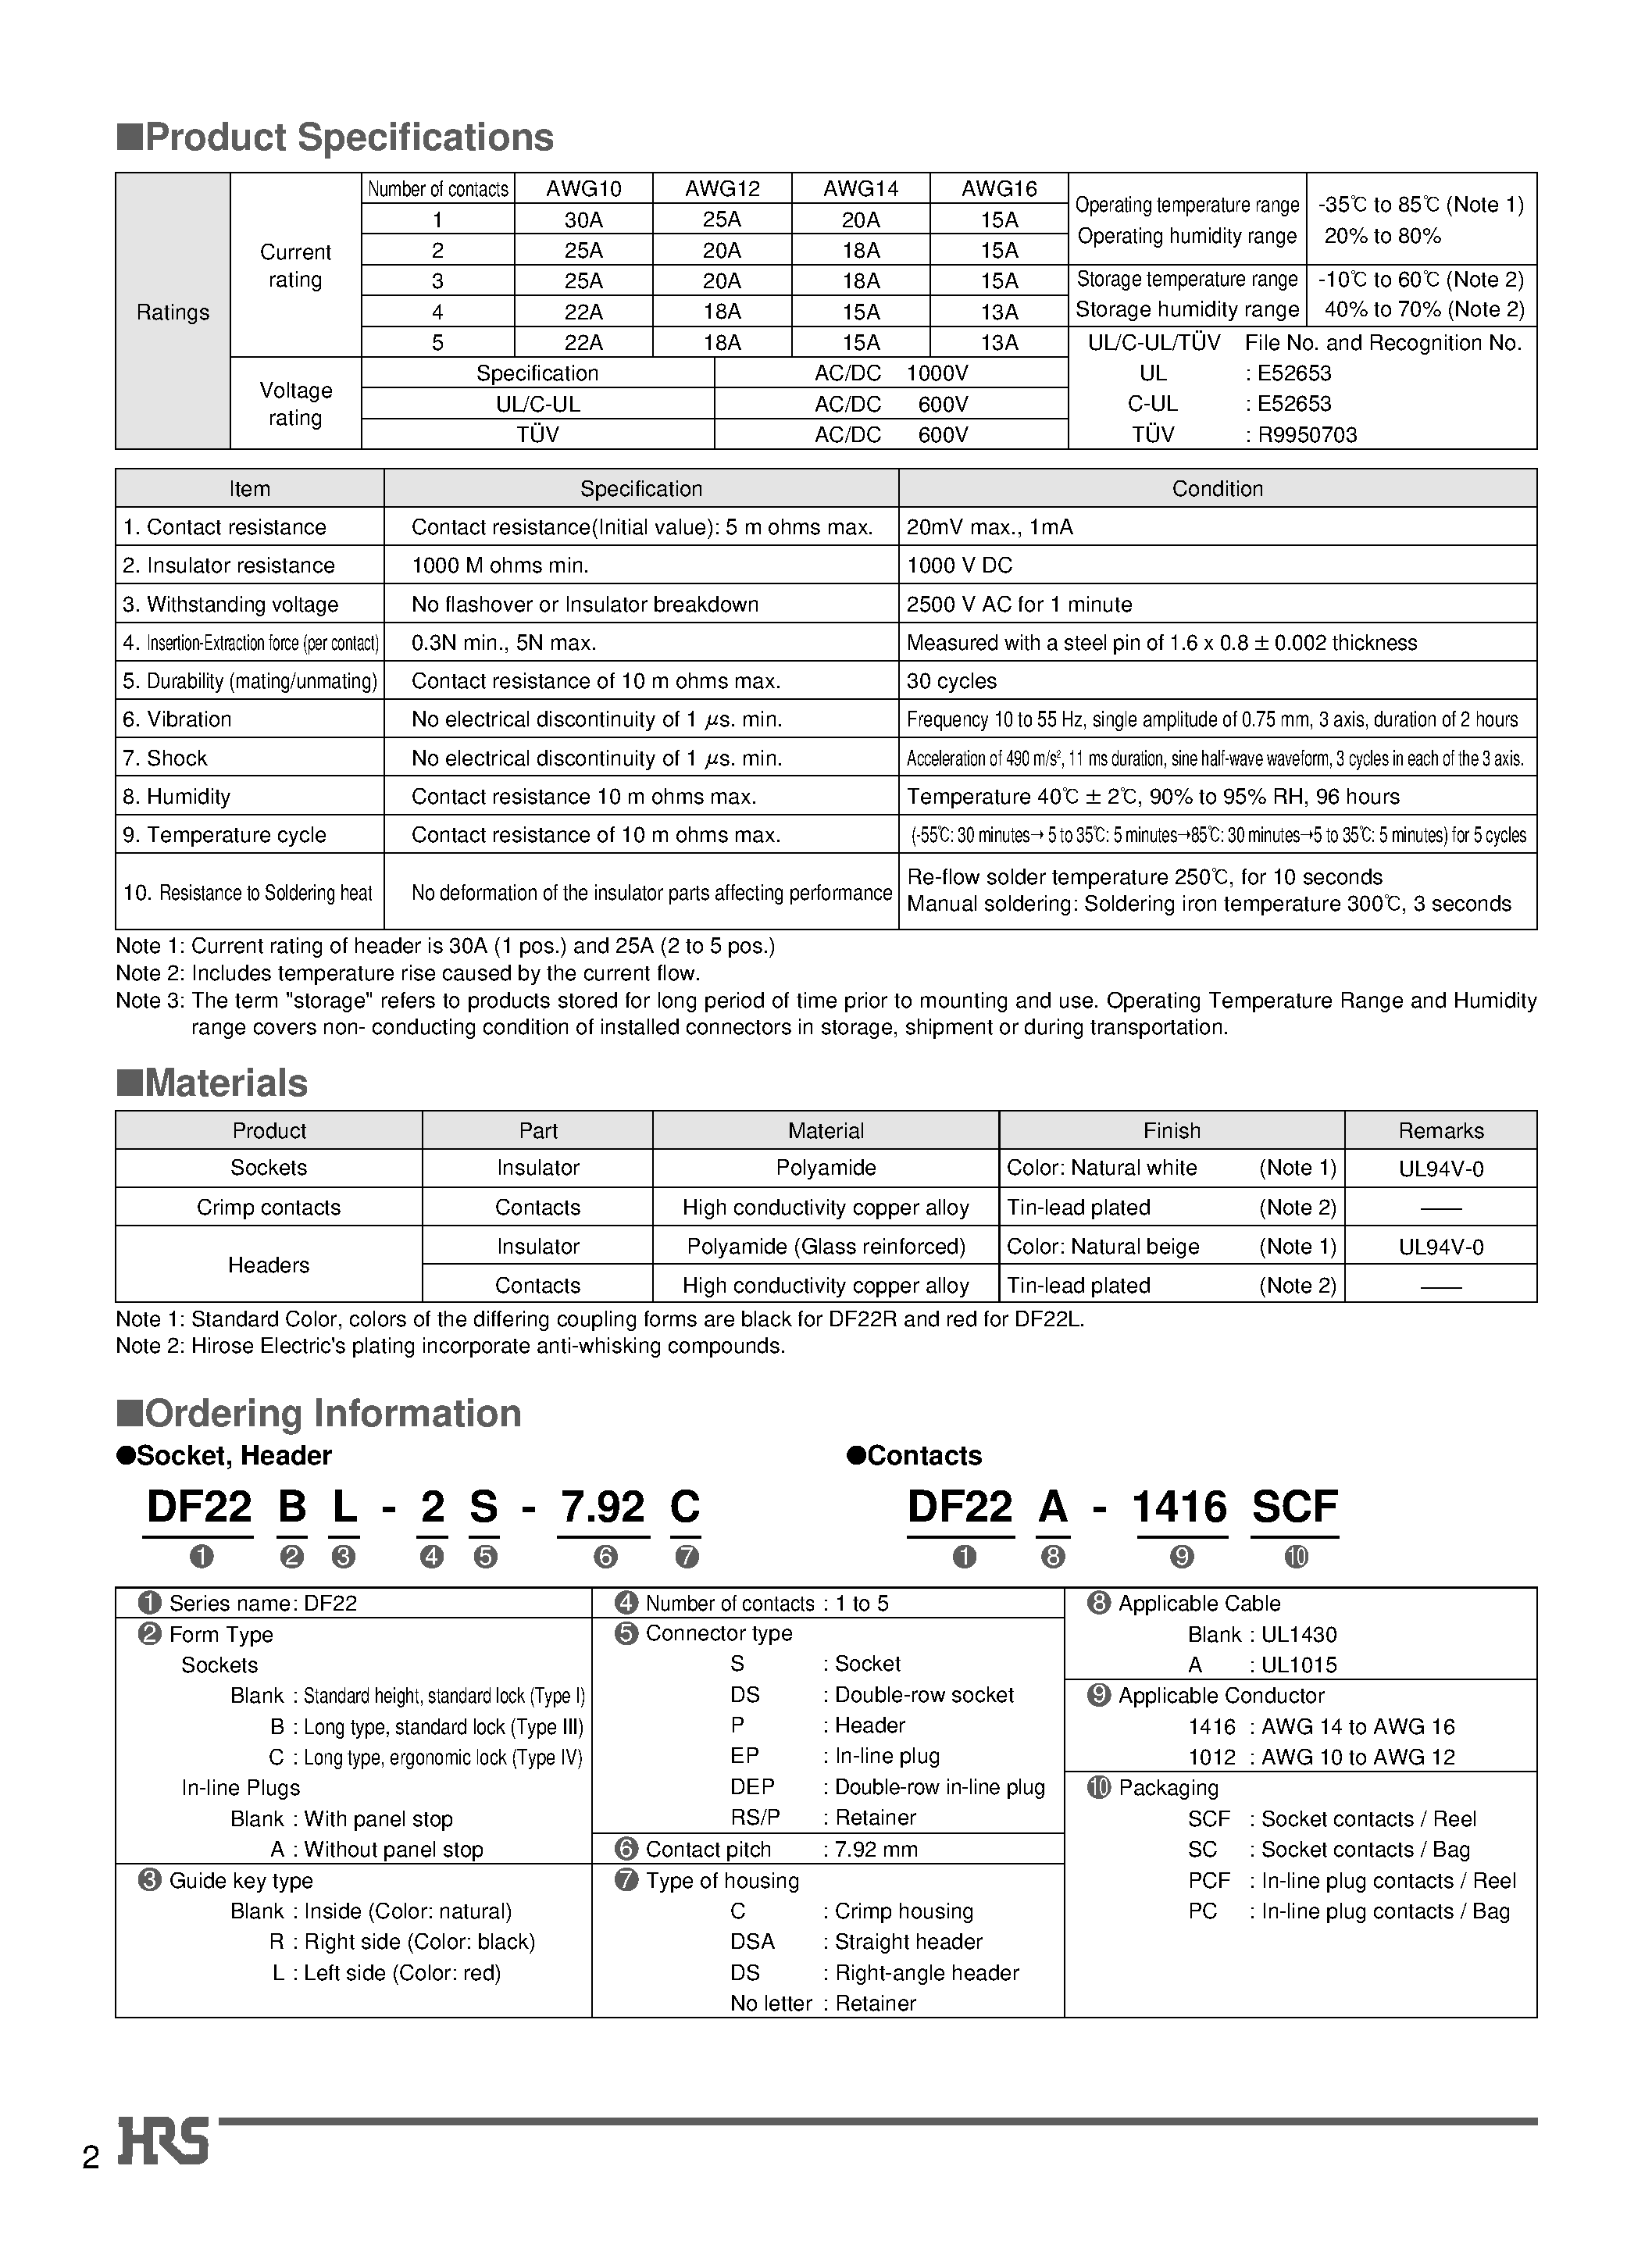 Datasheet DF22A-1S-7.92C - 7.92 mm Contact Pitch/ High-Current Connectors for Internal Power Supplies (UL/ C-UL and TUV Listed) page 2